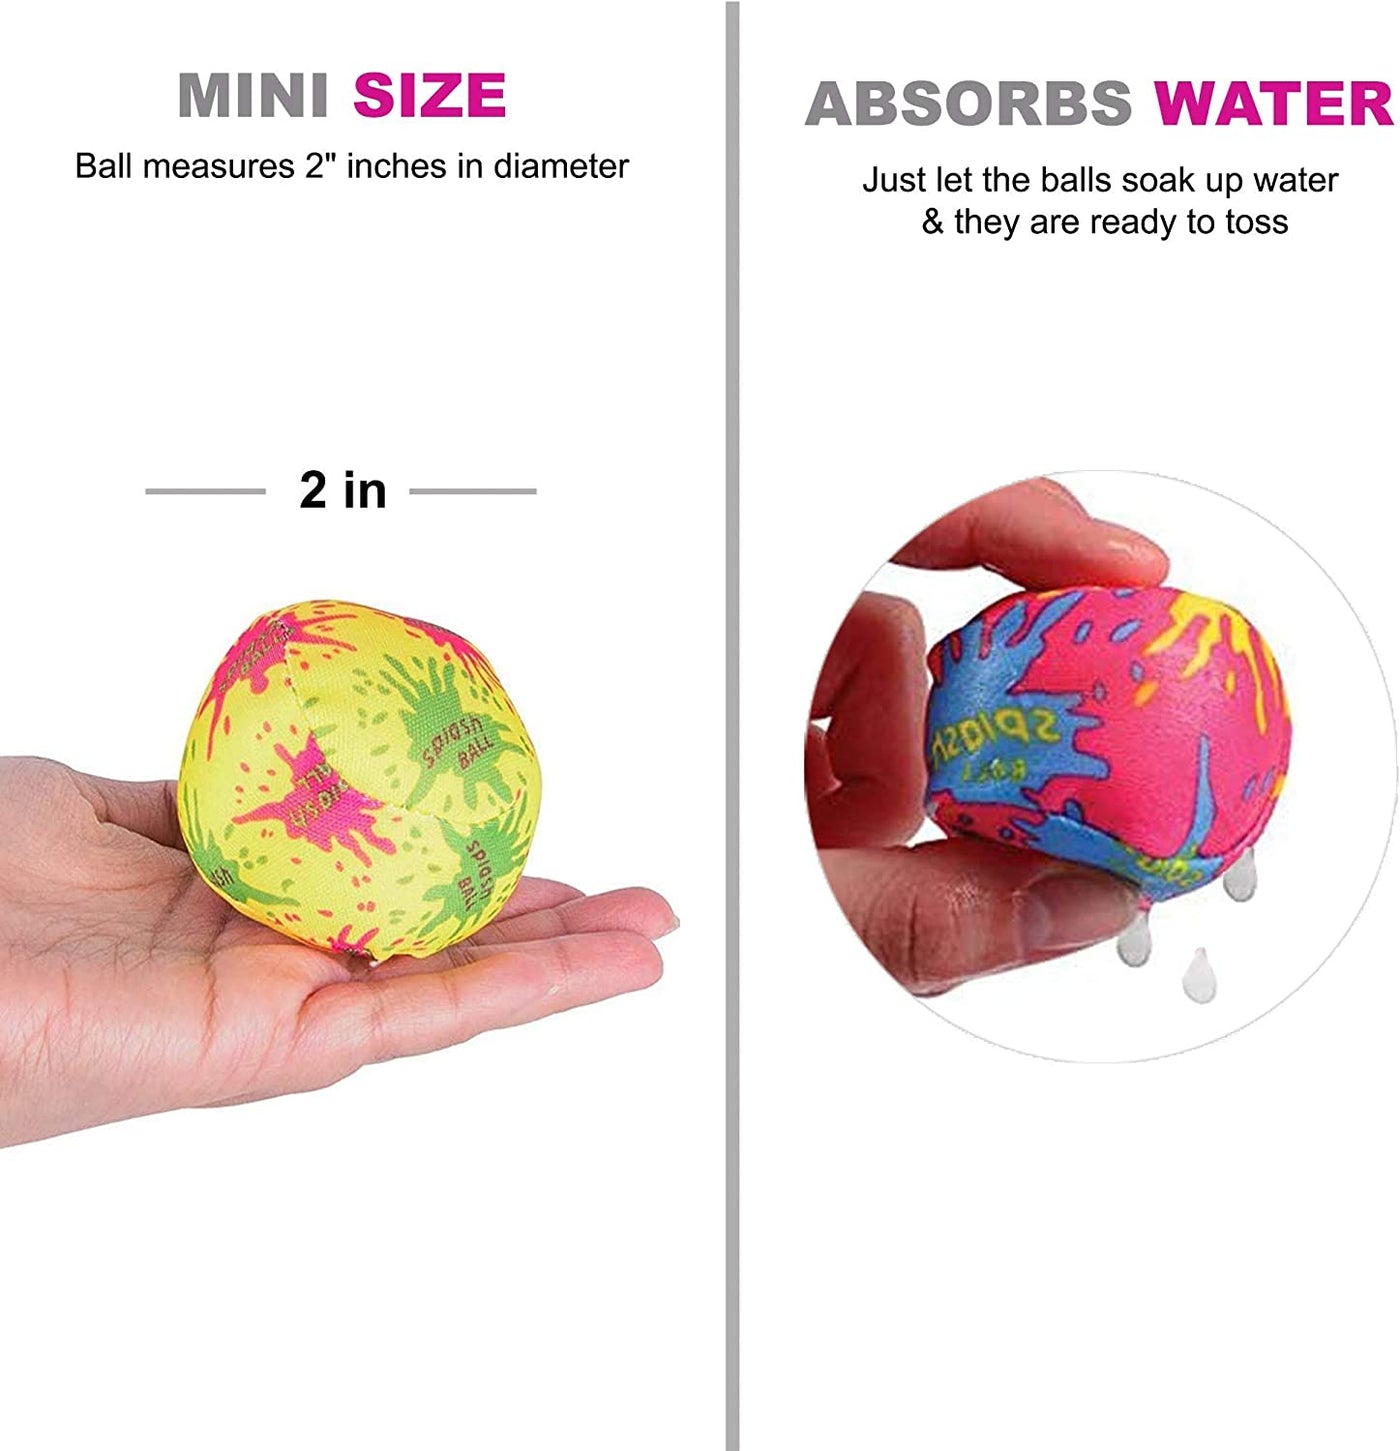 24 Pack - 2" Water Bomb Splash Balls - Mini Water Absorbent Ball - Kids Pool Toys, Outdoor Water Activities for Kids, Pool Beach Party Favors. Water Fight Games by 4E's Novelty